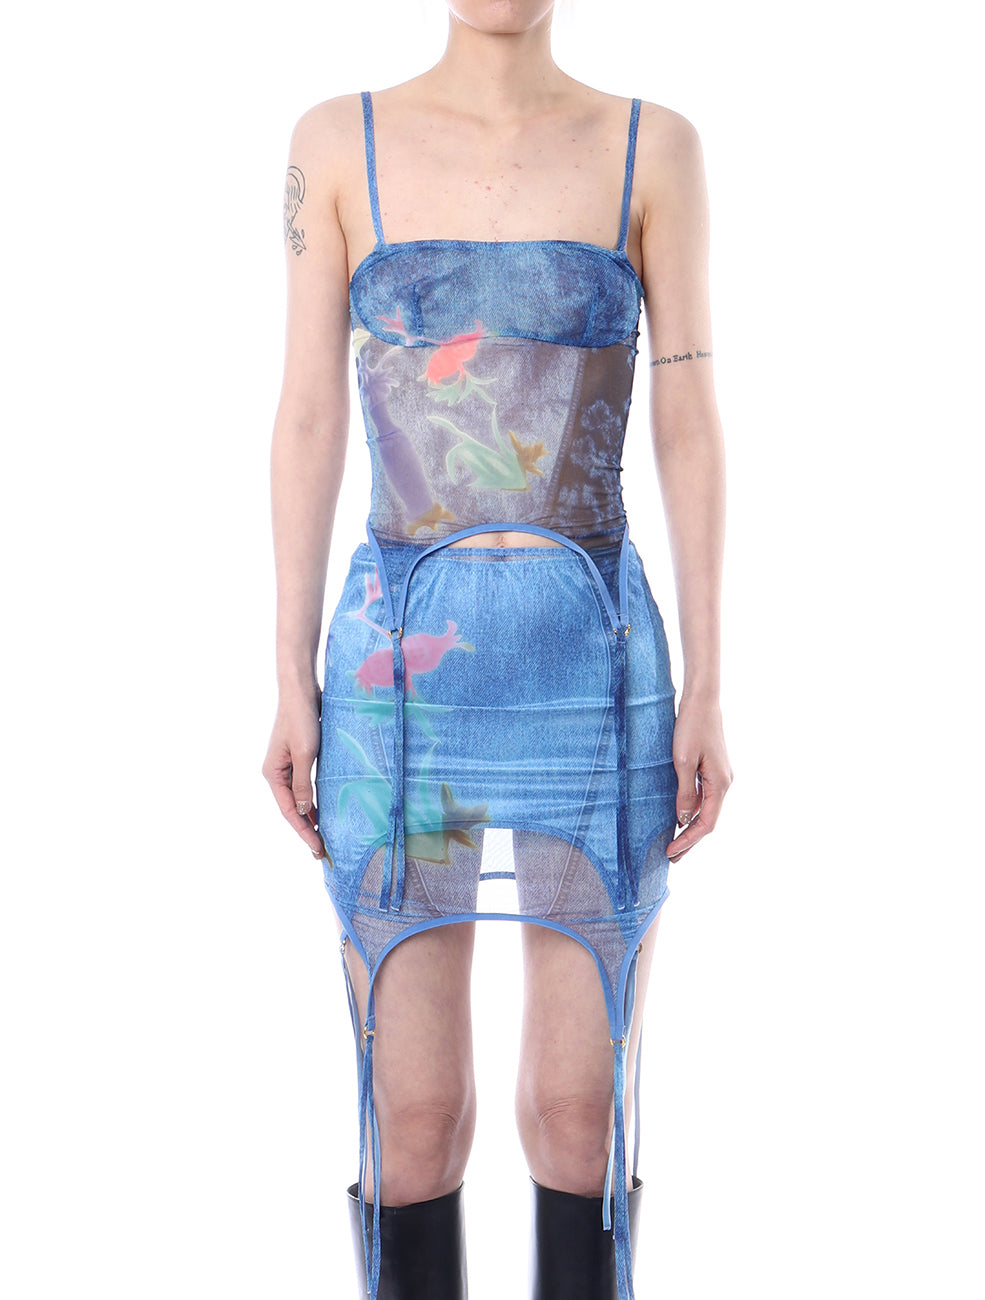 RoomSERVICE x Shyness exclusive Denim Print Camisole